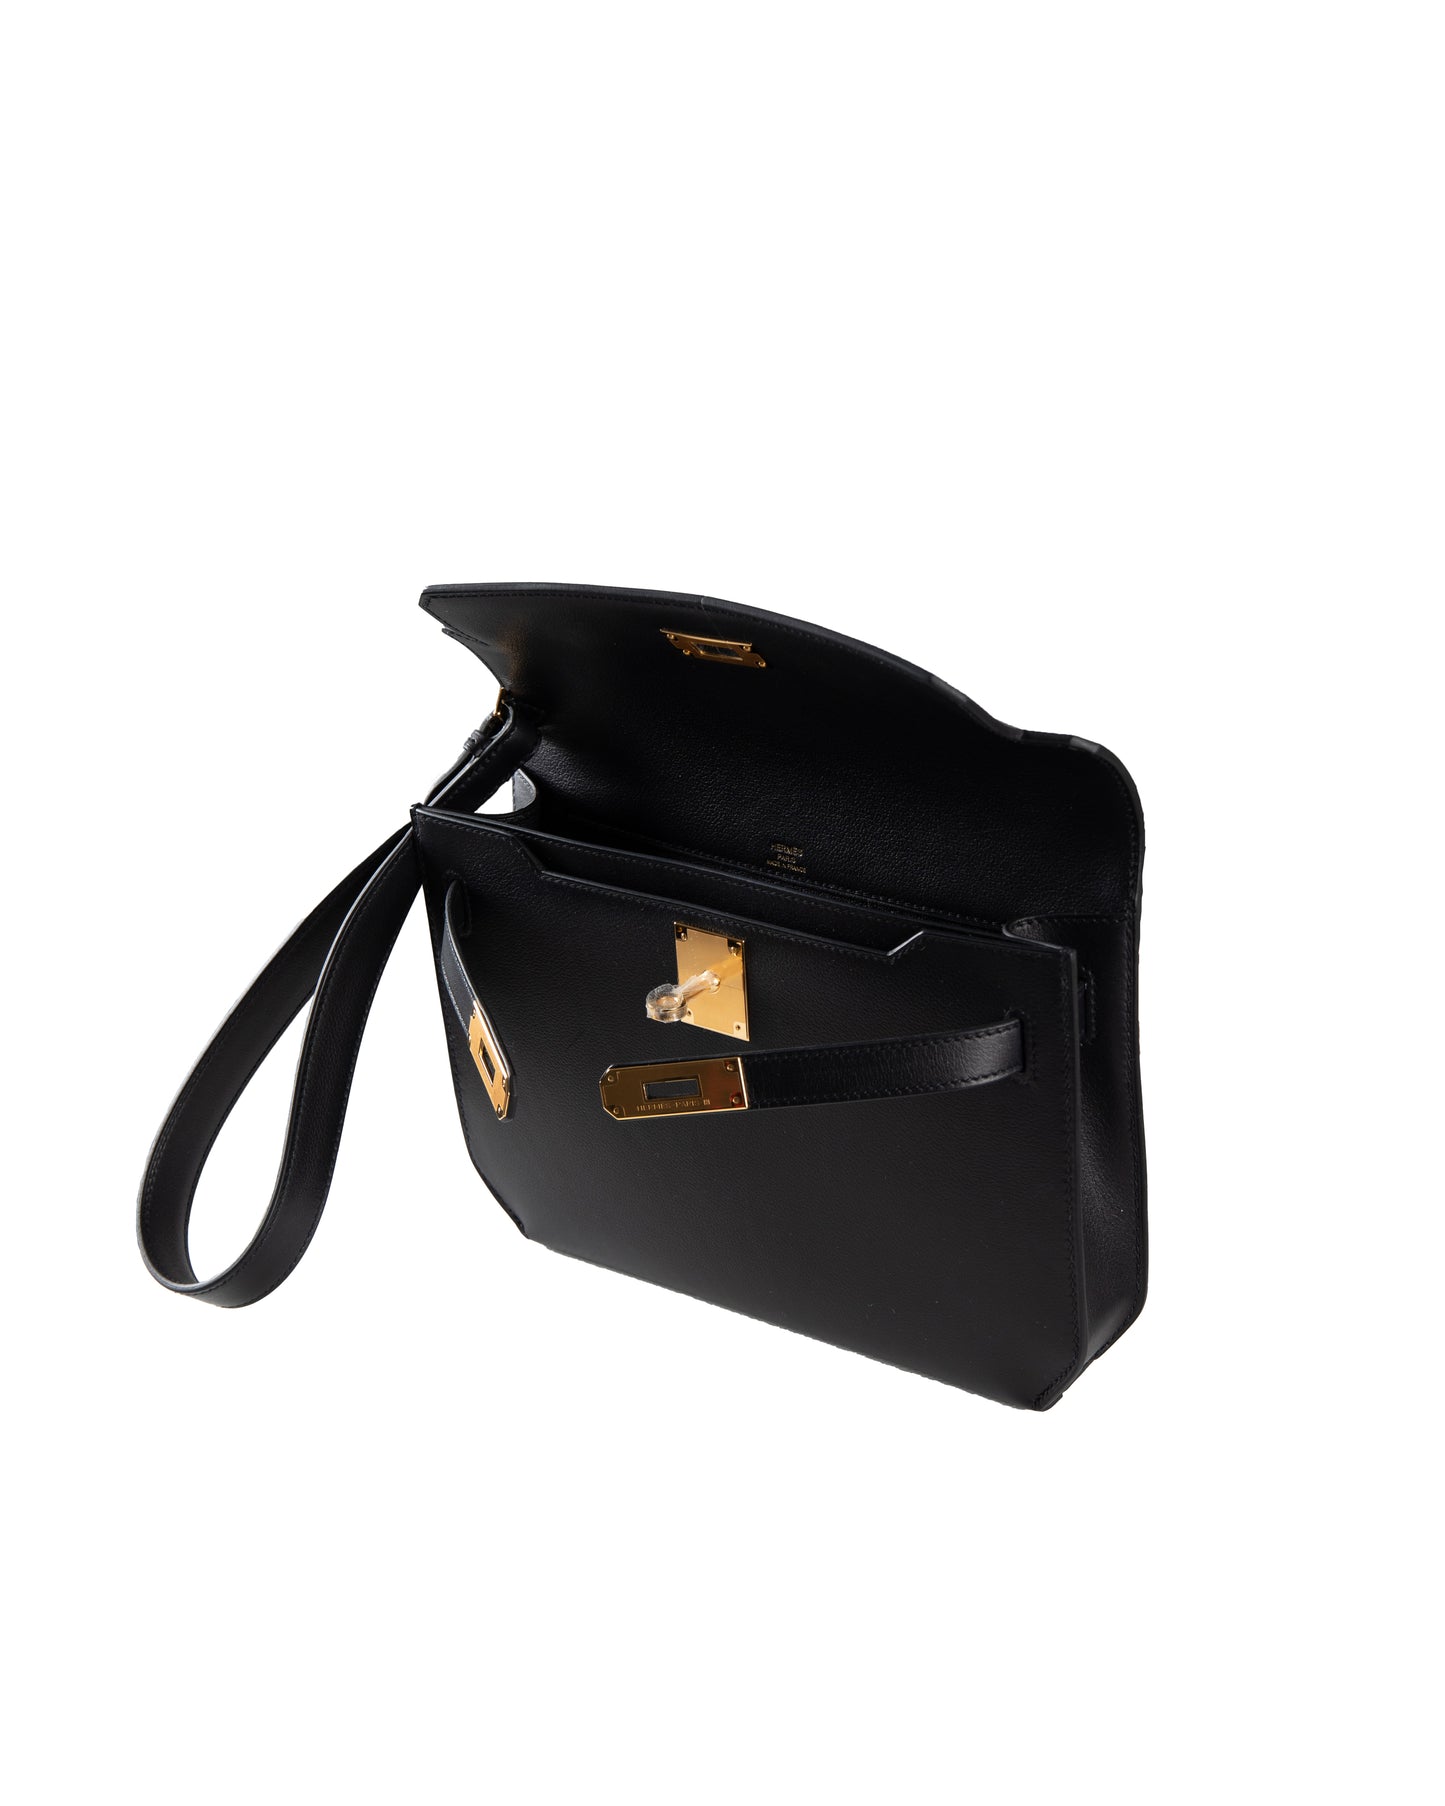 Kelly Depeches Pouch 25 in Black Evergrain Leather with Gold Hardware